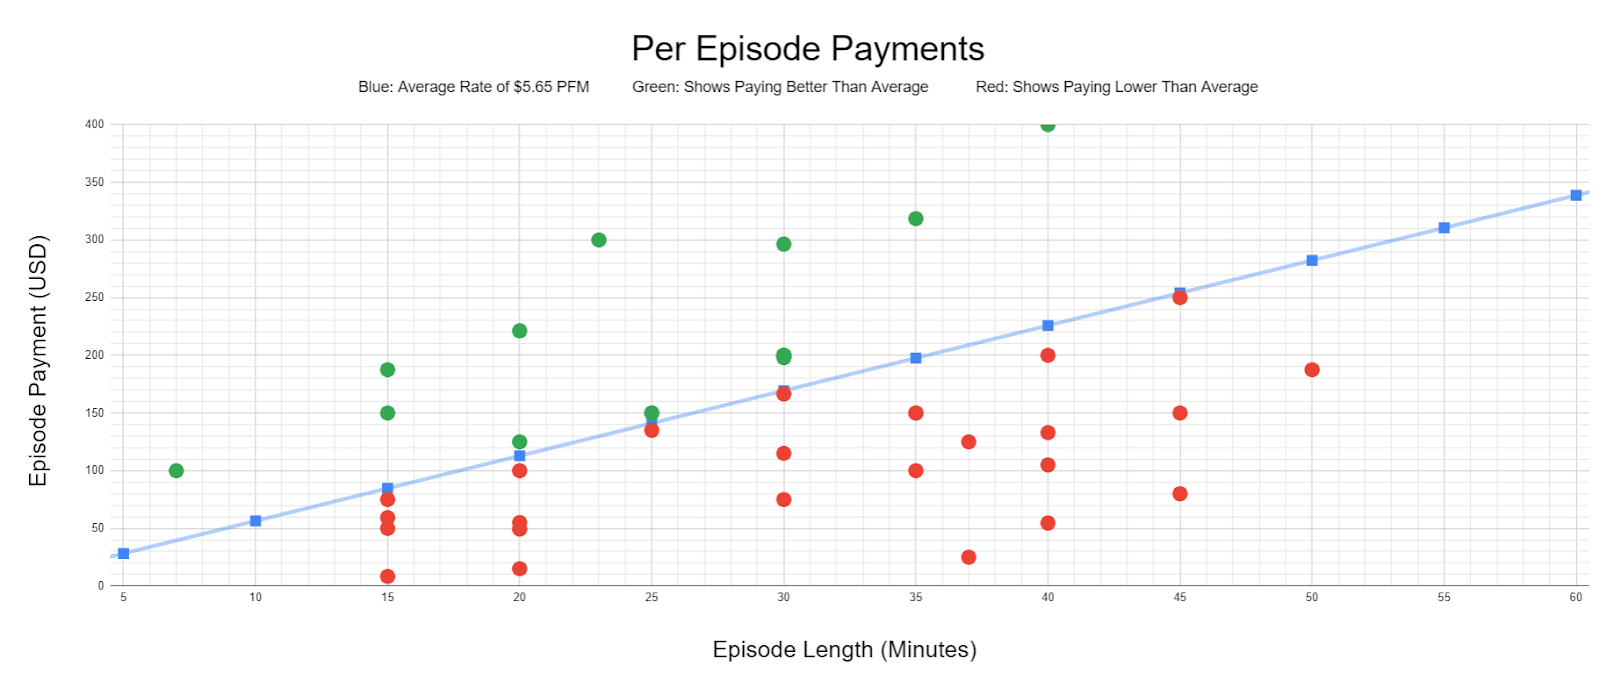 A graph of Per Episode Payments comparing Episode Payment (USD) to Episode Length (Minutes). Green dots show podcasts paying better than average, red dots podcasts paying lower than average, and a blue line across the middle demonstrates an average rate of $5.65 PFM. There are 11 green dots above the blue line, mostly in the middle of the spectrum (15-30 minutes) all of them at or under $300. There are 24 red dots below the blue line, ranging from 15-50 minutes.